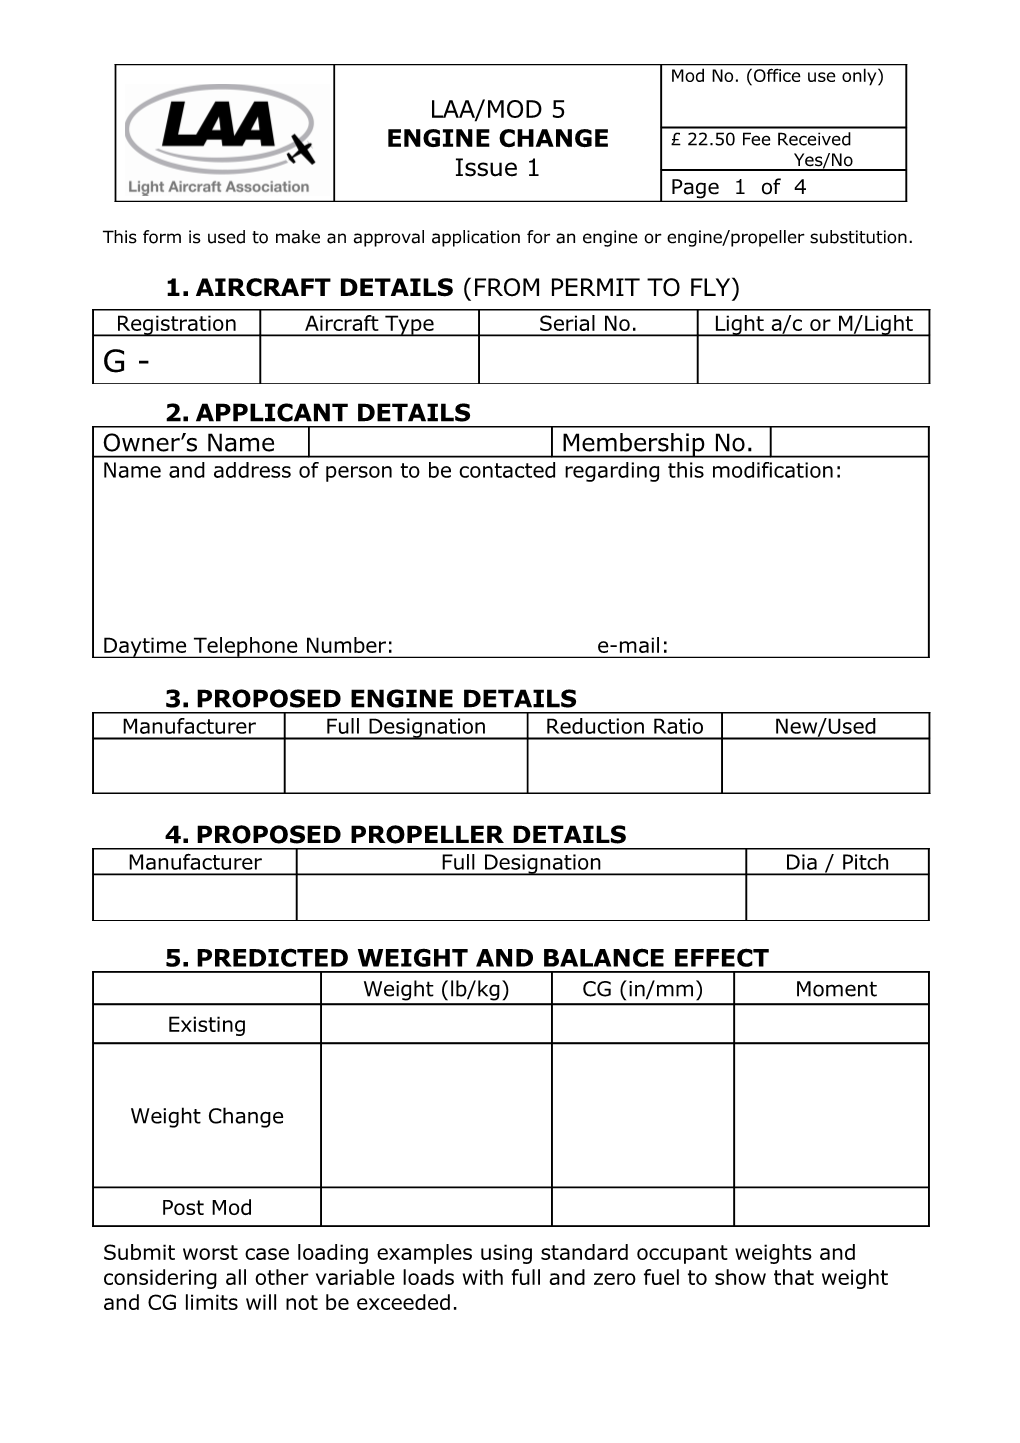 This Form Is Used to Make an Approval Application for an Engine Or Engine/Propeller